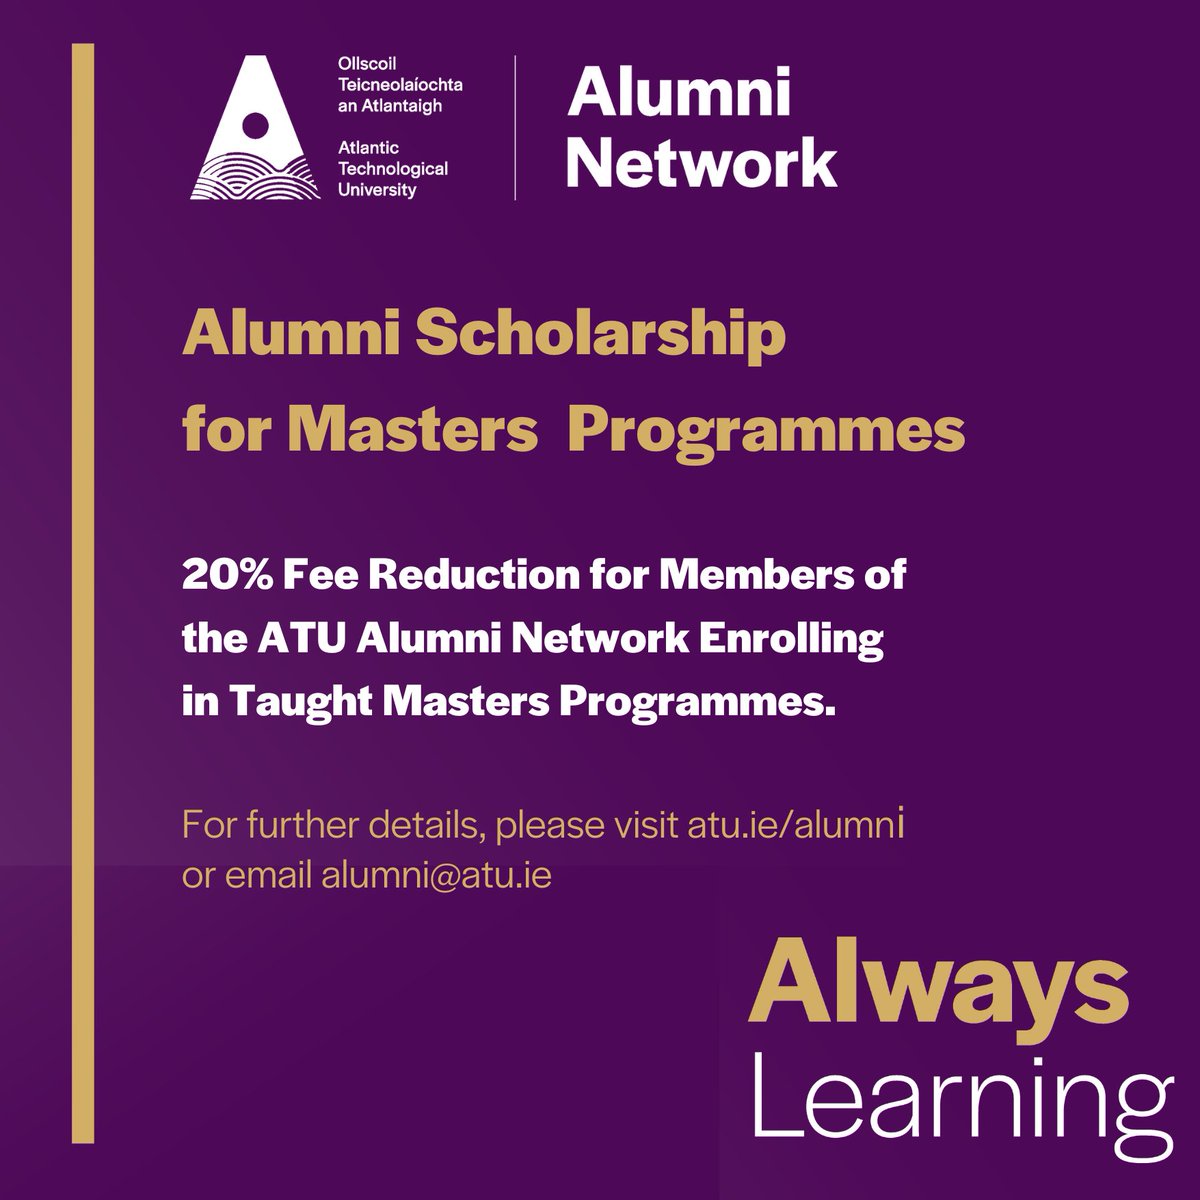 Calling all St Angela's Alumni? New Alumni Scholarship, a 20% fee reduction for those enrolling in taught masters programmes at ATU! Check out our webpage for full T&C’s & eligibility criteria. Join us in taking the next step in your lifelong learning journey! #ATUAlumni